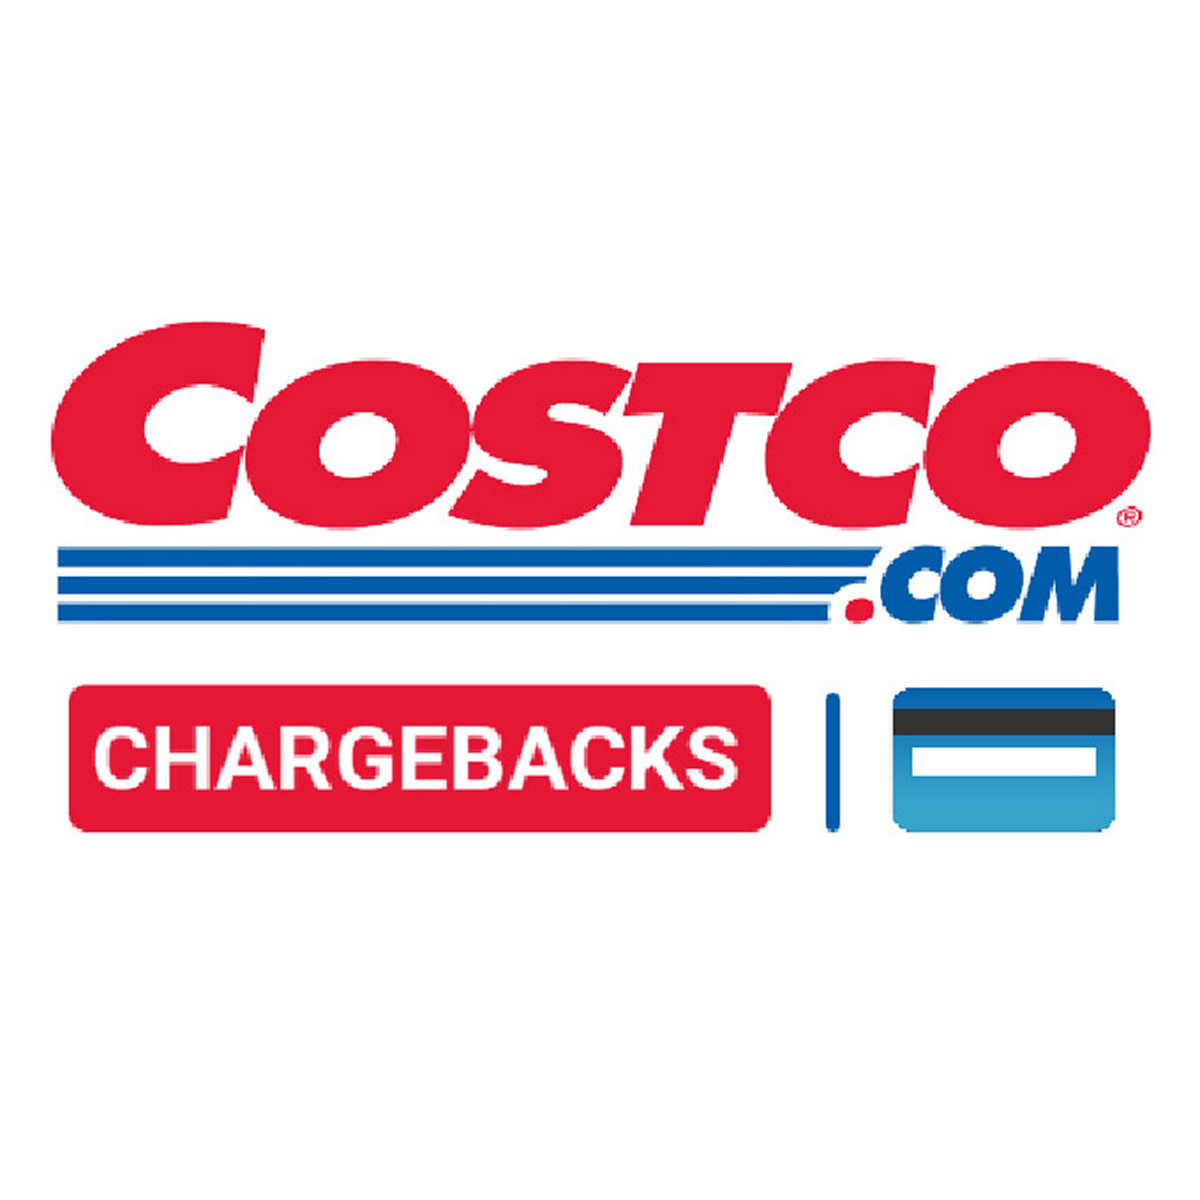 images.costco-static.com/ImageDelivery/imageServic